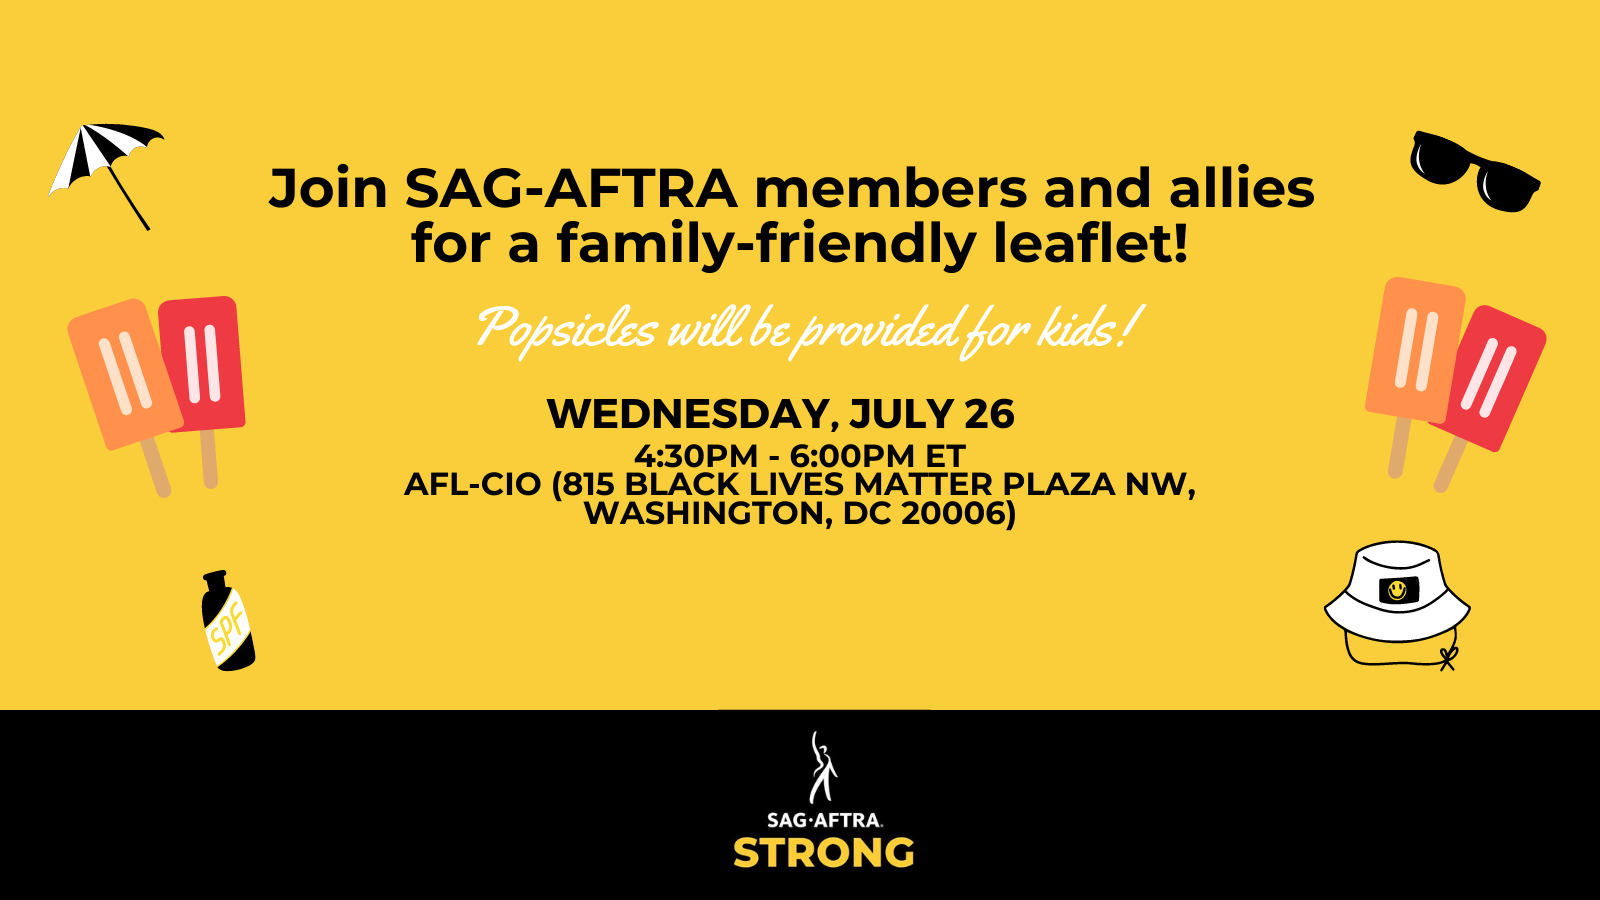 Join SAG-AFTRA members and allies for a family-friendly leaflet! Click here to RSVP.